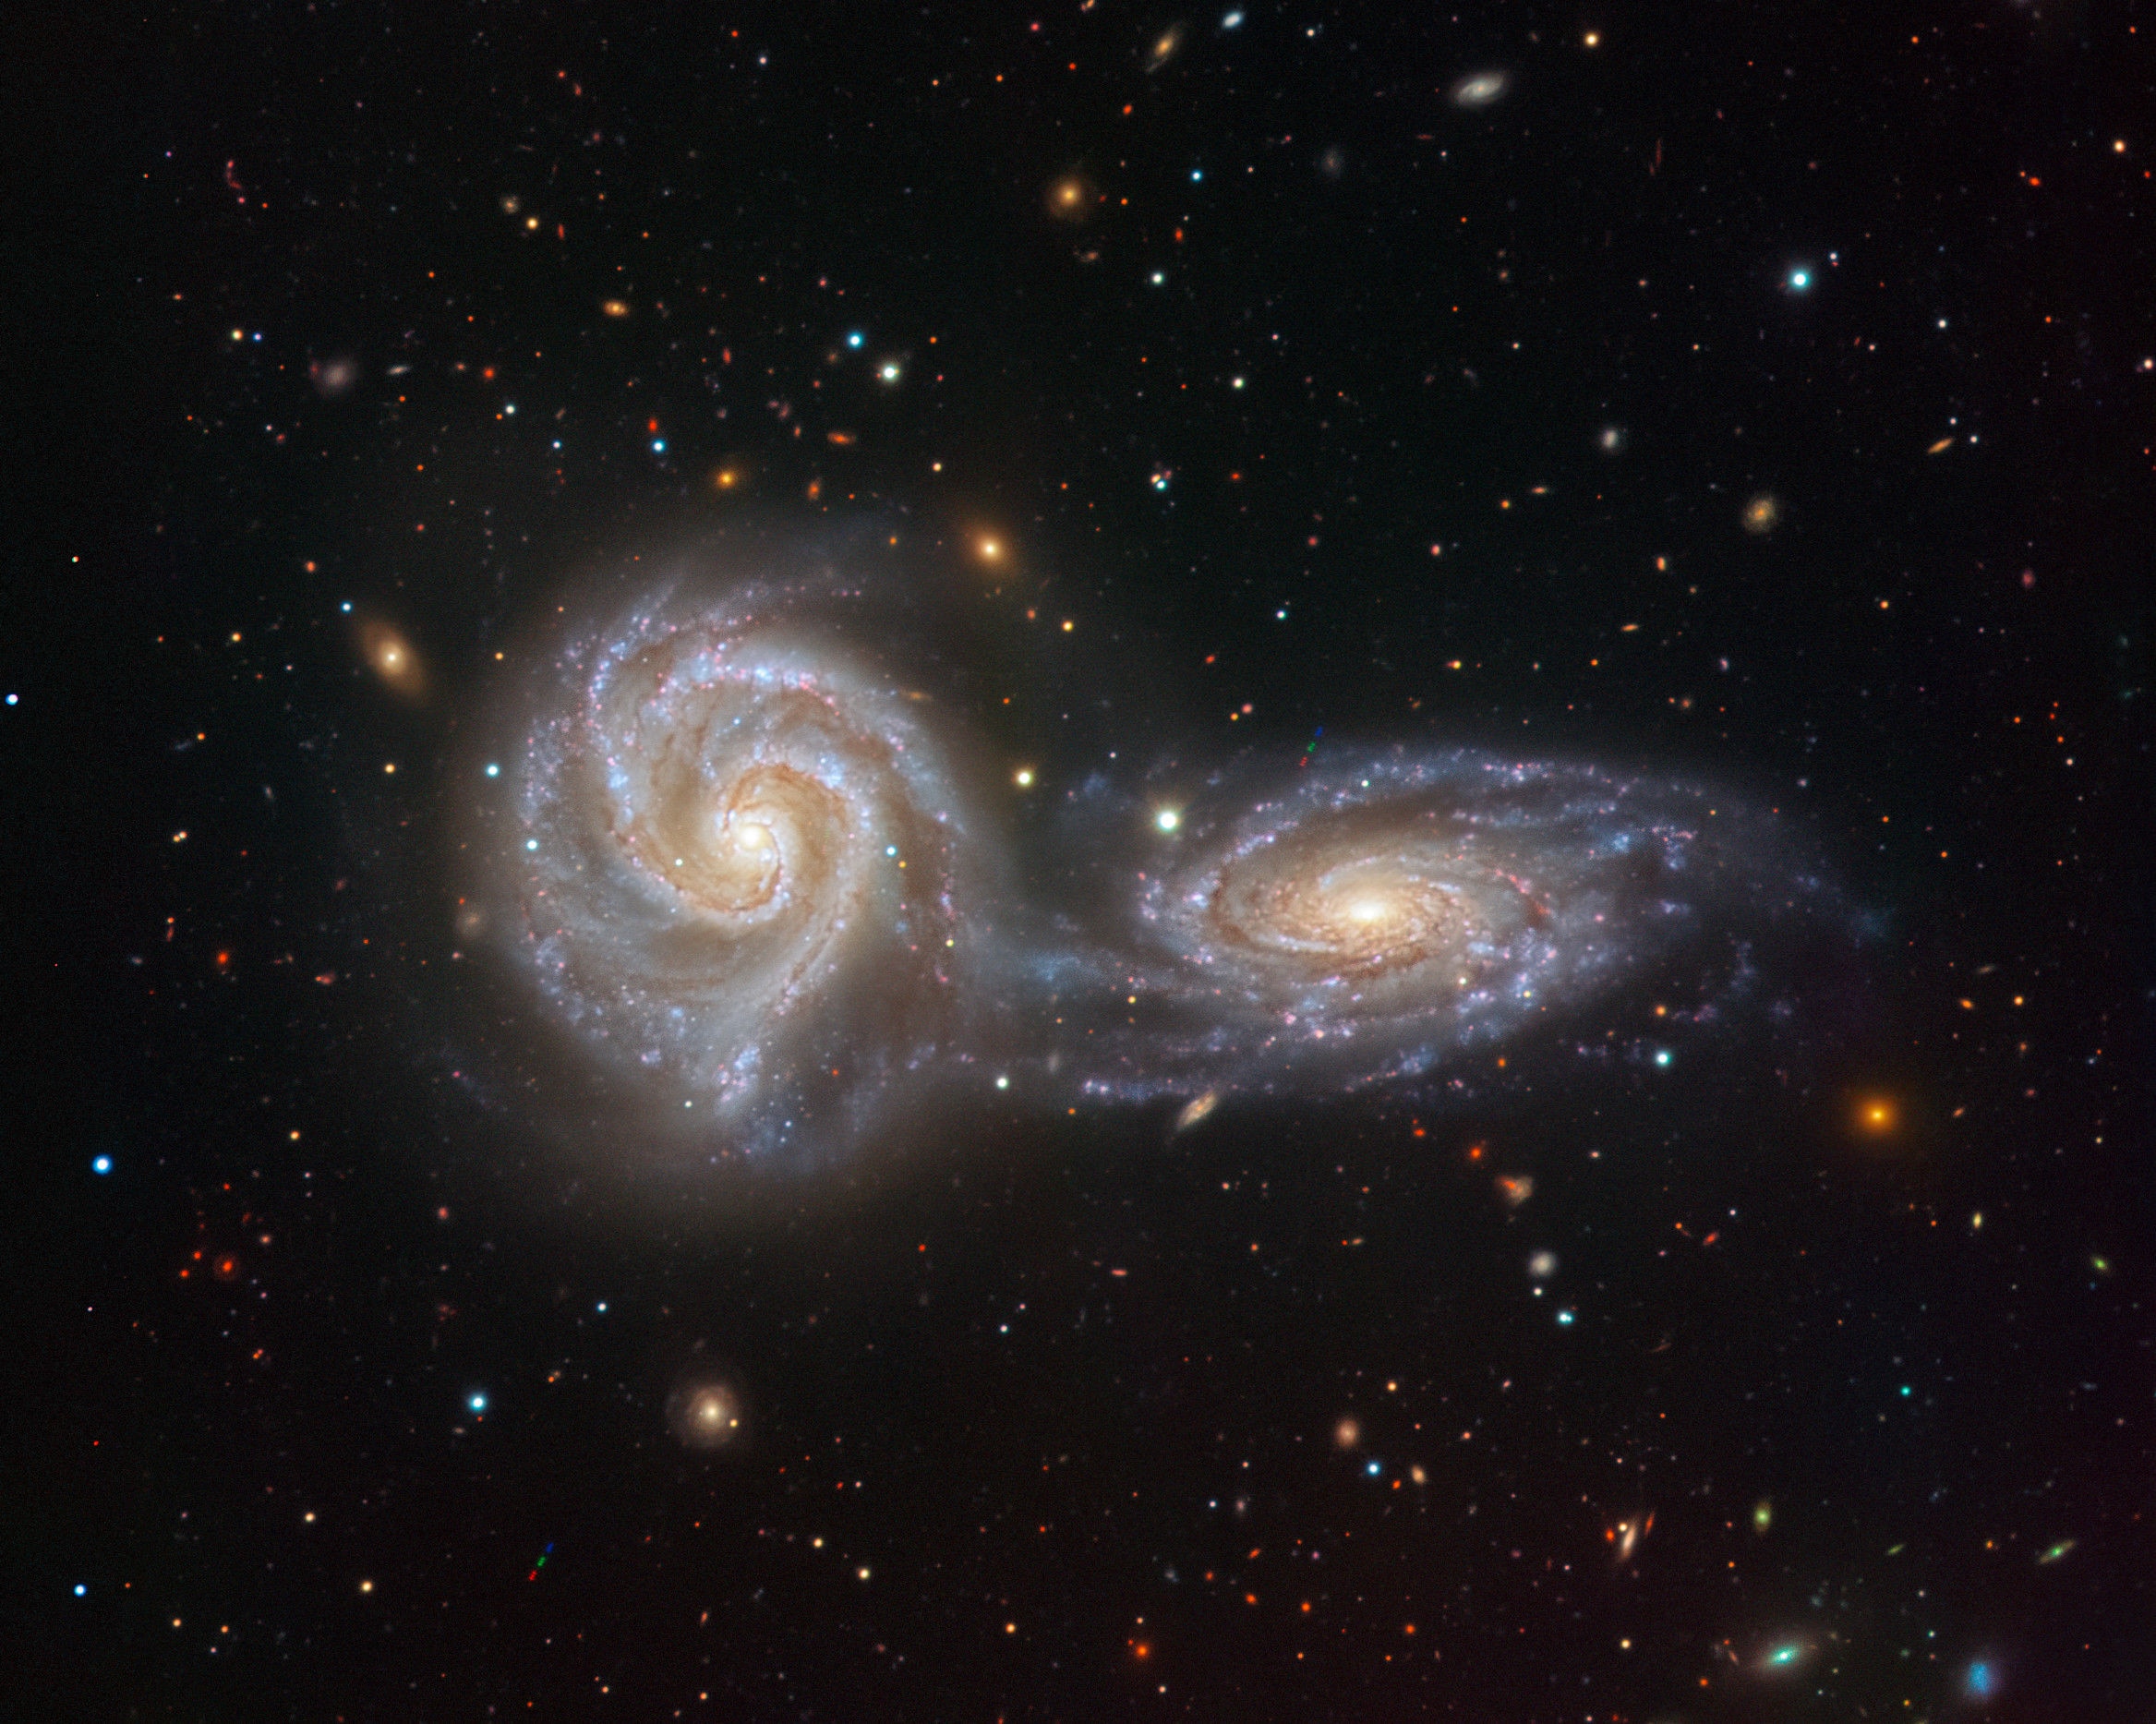 NGC 5426 (right) and NGC 5427 (left), together known as Arp 271, are close enough to each other to be interacting. Credit: ESO/Juan Carlos Muñoz​​​​​​​